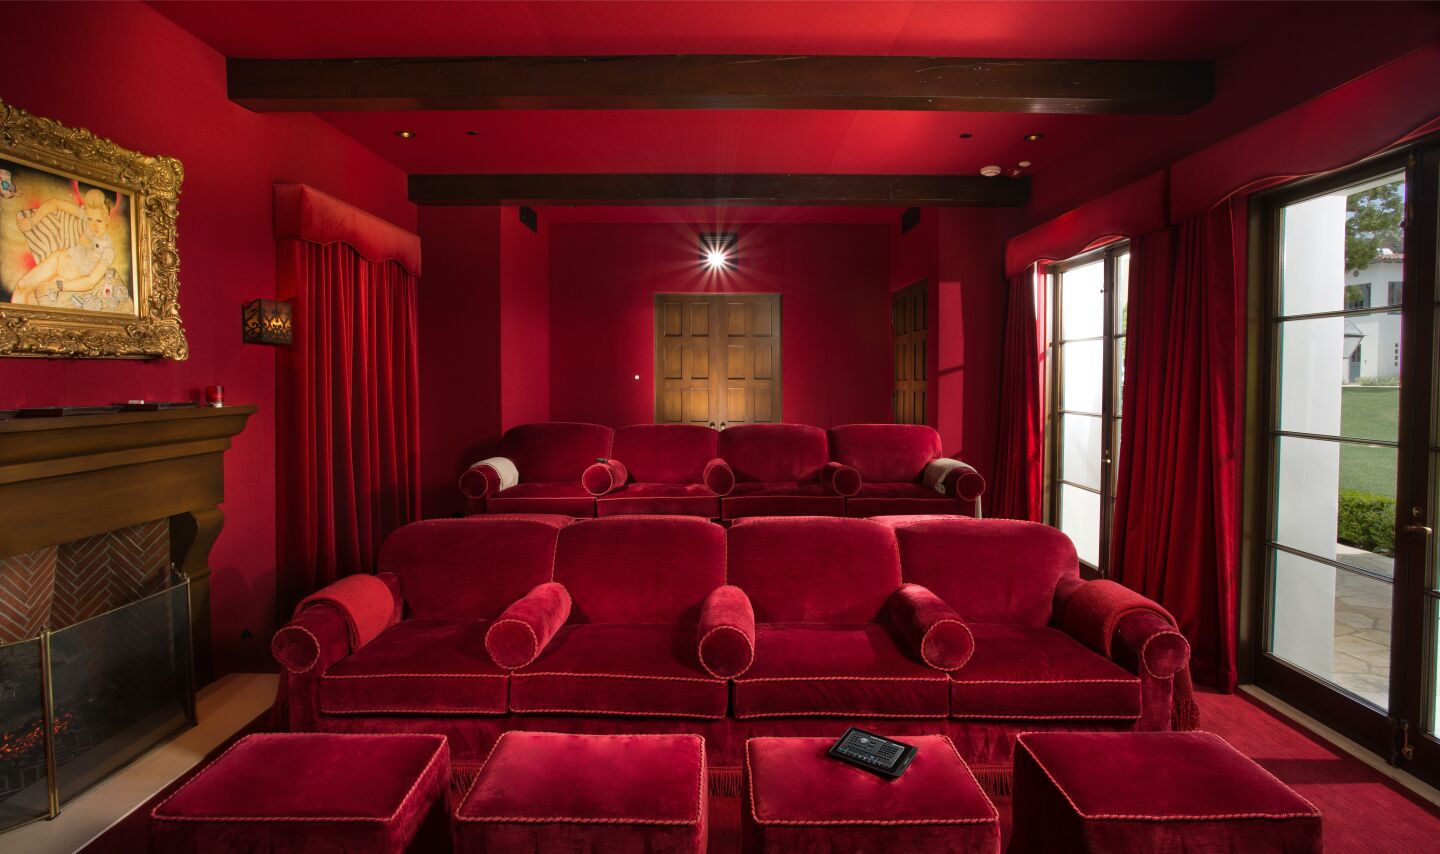 The movie theater with red walls and ceilings and chairs and tables, plus a fireplace.